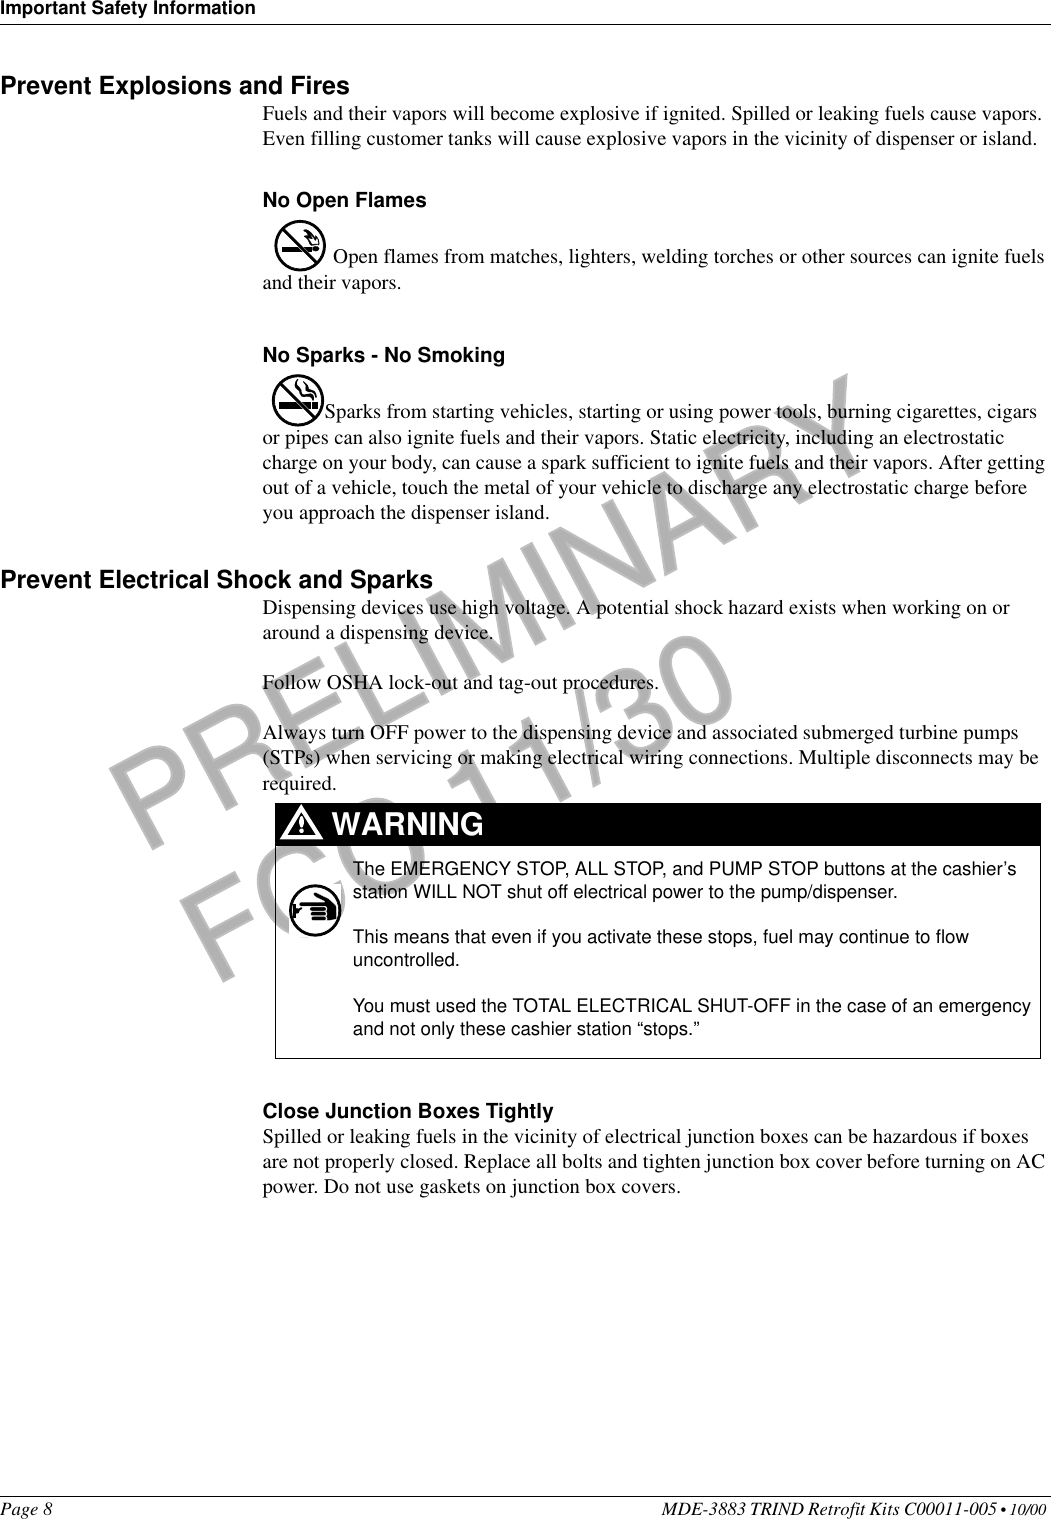 Important Safety InformationPage 8 MDE-3883 TRIND Retrofit Kits C00011-005 • 10/00 PRELIMINARYFCC 11/30Prevent Explosions and FiresFuels and their vapors will become explosive if ignited. Spilled or leaking fuels cause vapors. Even filling customer tanks will cause explosive vapors in the vicinity of dispenser or island.No Open Flames Open flames from matches, lighters, welding torches or other sources can ignite fuels and their vapors.No Sparks - No SmokingSparks from starting vehicles, starting or using power tools, burning cigarettes, cigars or pipes can also ignite fuels and their vapors. Static electricity, including an electrostatic charge on your body, can cause a spark sufficient to ignite fuels and their vapors. After getting out of a vehicle, touch the metal of your vehicle to discharge any electrostatic charge before you approach the dispenser island.Prevent Electrical Shock and SparksDispensing devices use high voltage. A potential shock hazard exists when working on or around a dispensing device. Follow OSHA lock-out and tag-out procedures.Always turn OFF power to the dispensing device and associated submerged turbine pumps (STPs) when servicing or making electrical wiring connections. Multiple disconnects may be required. Close Junction Boxes TightlySpilled or leaking fuels in the vicinity of electrical junction boxes can be hazardous if boxes are not properly closed. Replace all bolts and tighten junction box cover before turning on AC power. Do not use gaskets on junction box covers. The EMERGENCY STOP, ALL STOP, and PUMP STOP buttons at the cashier’s station WILL NOT shut off electrical power to the pump/dispenser. This means that even if you activate these stops, fuel may continue to flow uncontrolled.You must used the TOTAL ELECTRICAL SHUT-OFF in the case of an emergency and not only these cashier station “stops.”WARNING